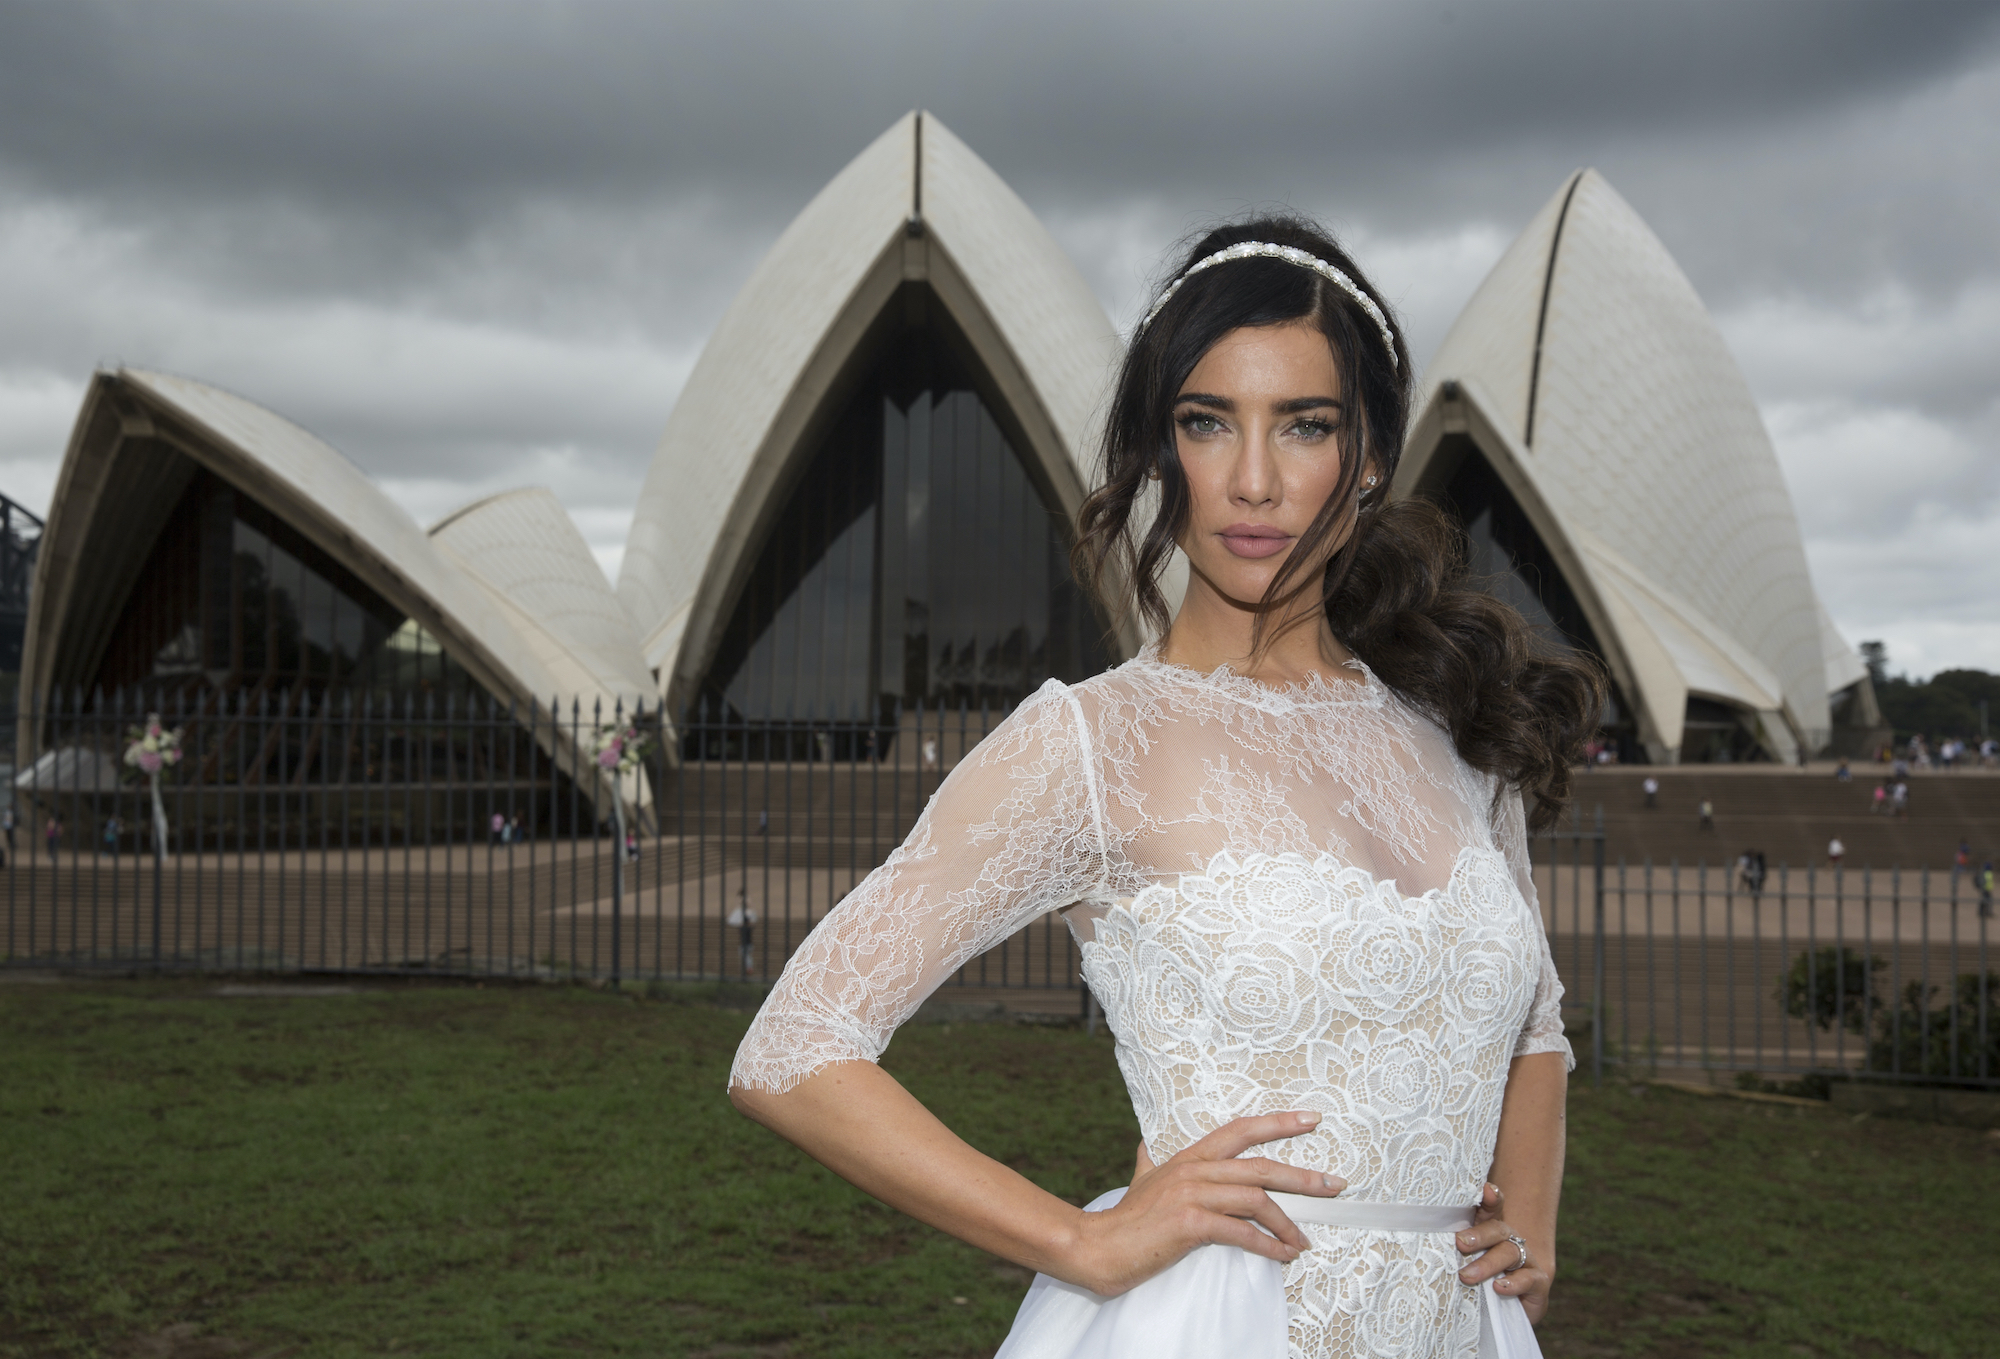 Jacqueline MacInnes Wood smiling in a wedding dress, in front of the Sydney Opera House